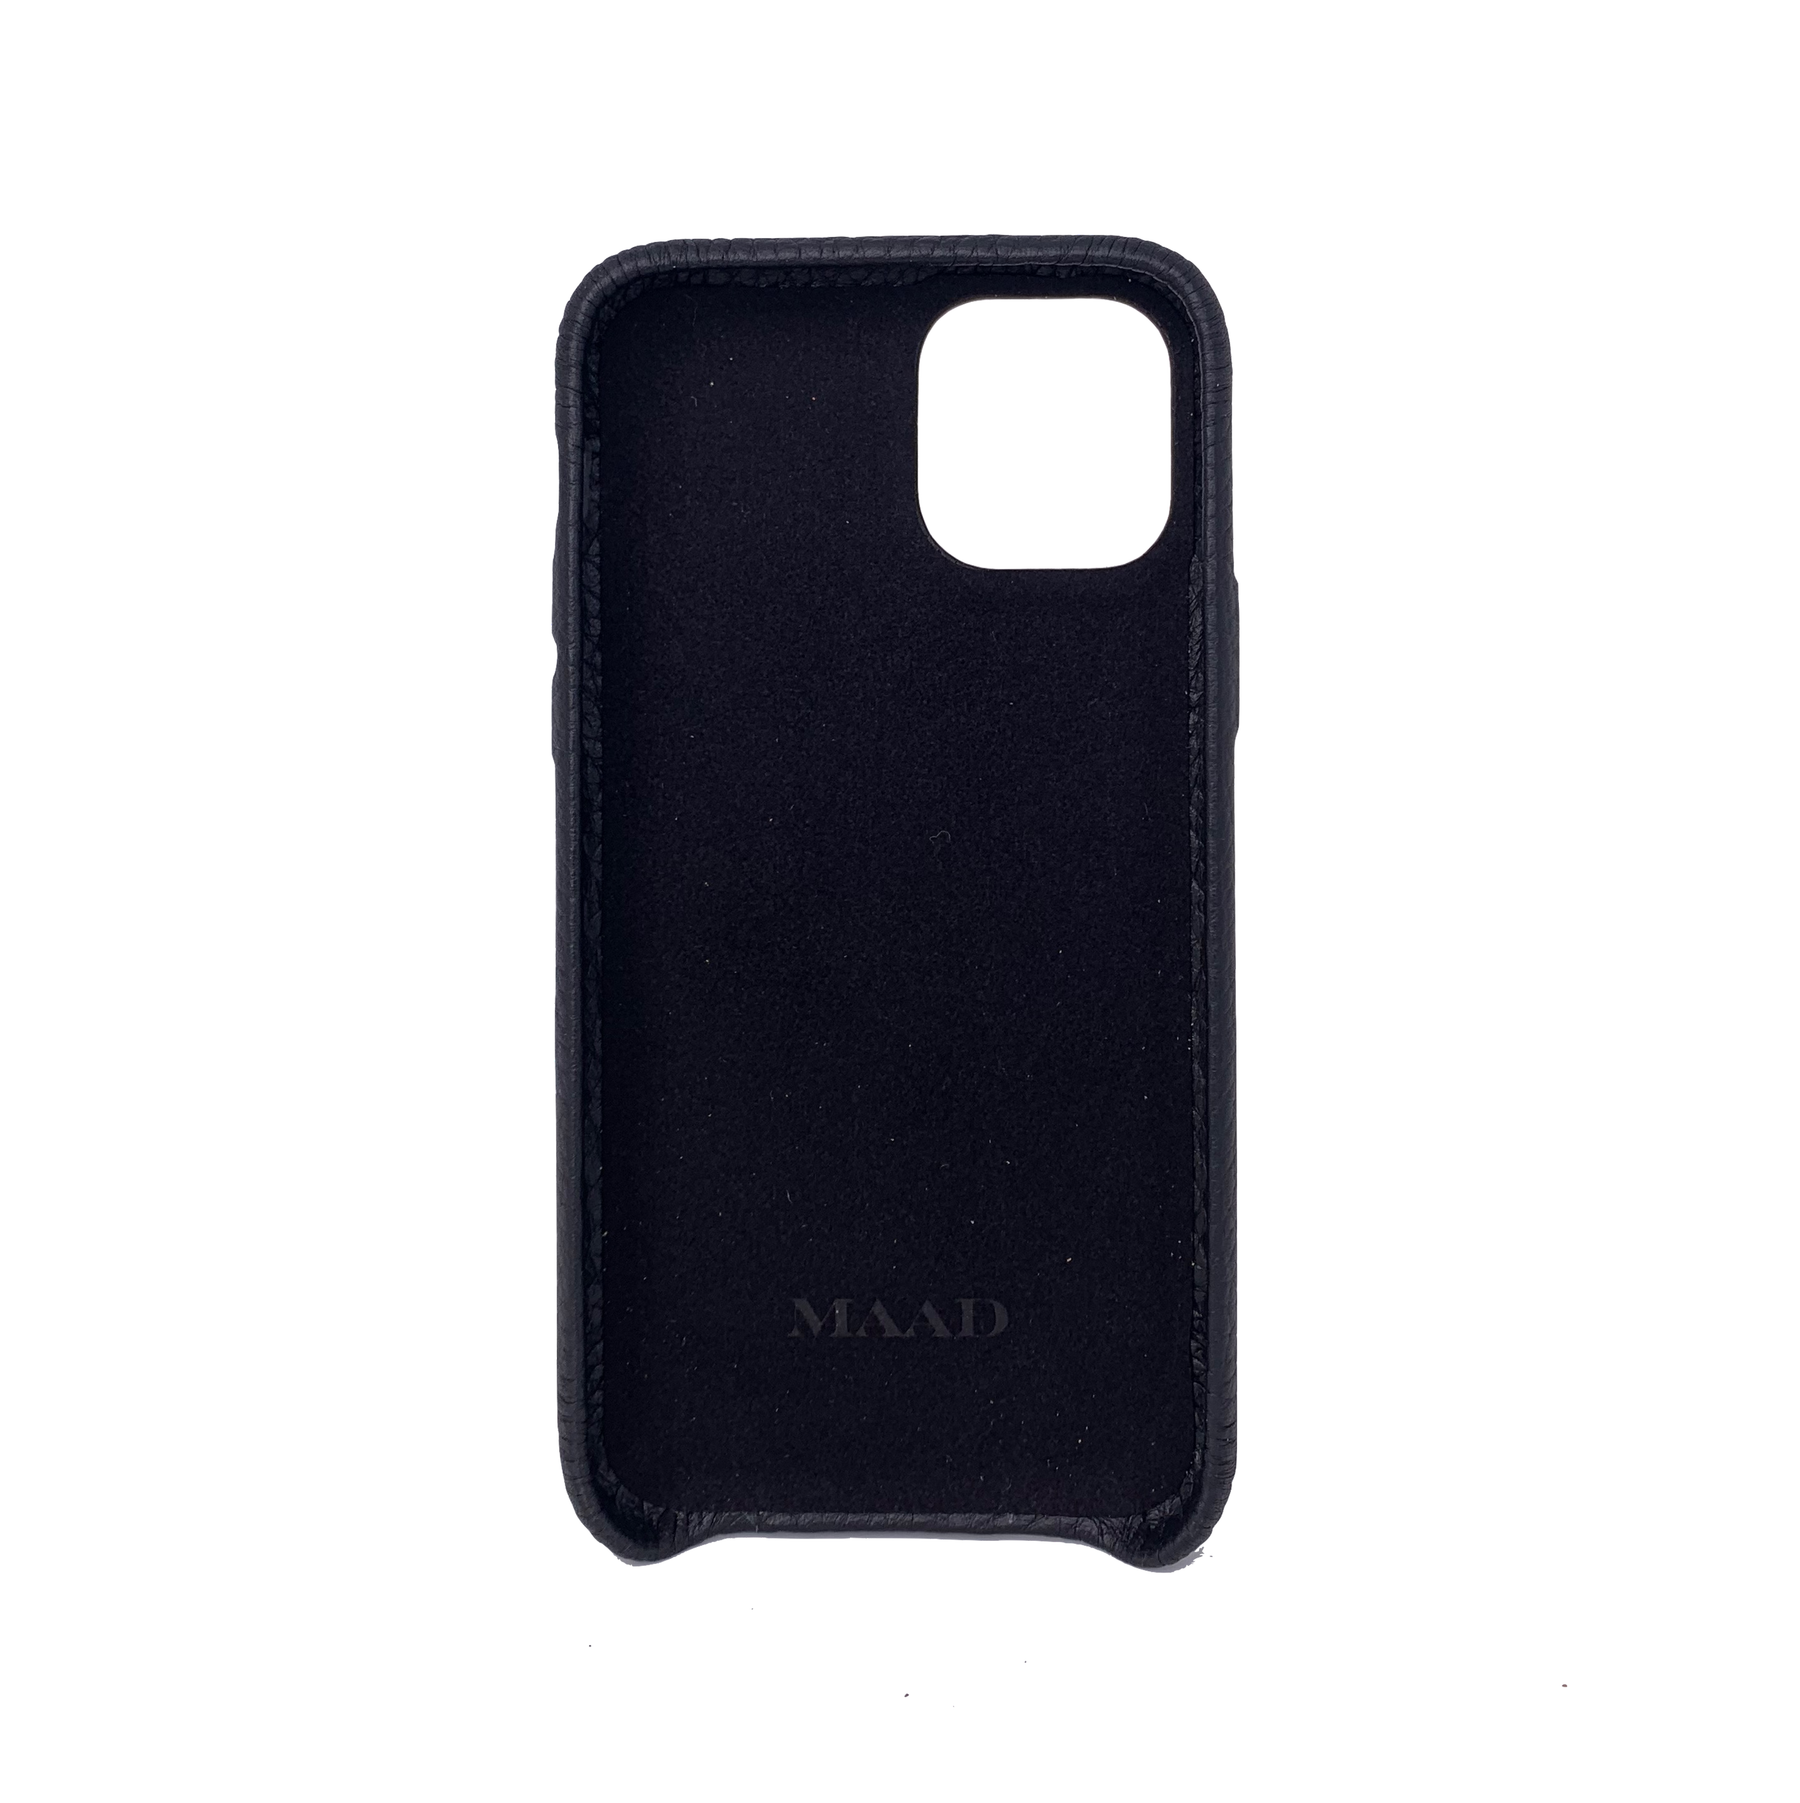 MAAD LVR Black IPhone 11 Pro Case - MAAD Collective - Saffiano IPhone Personalized Case 